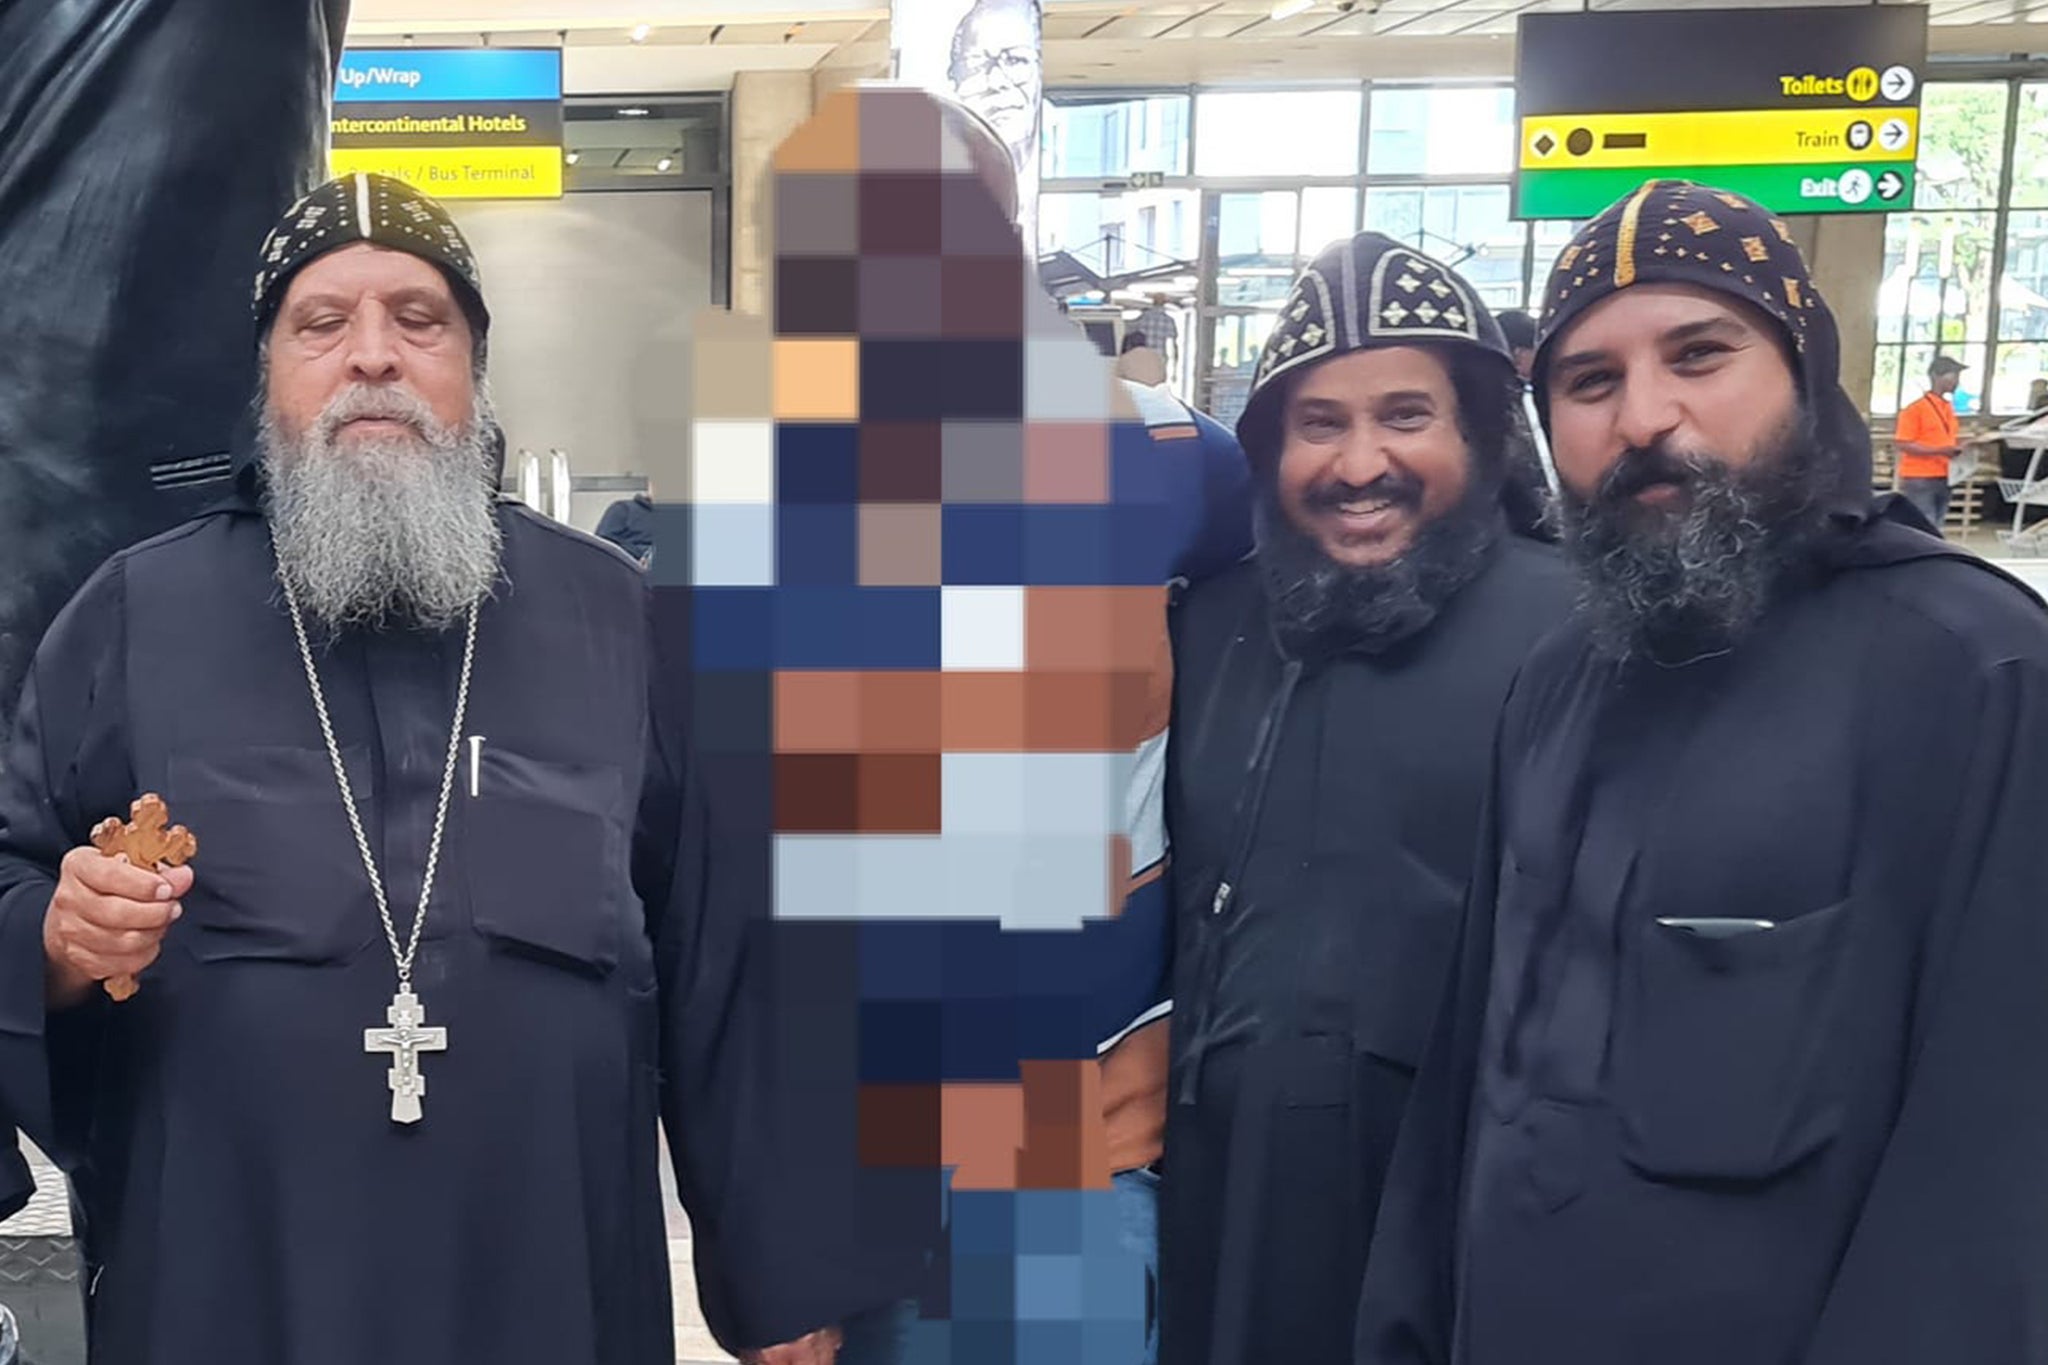 Three Egyptian Coptic monks have been “brutally killed” inside a monastery in South Africa